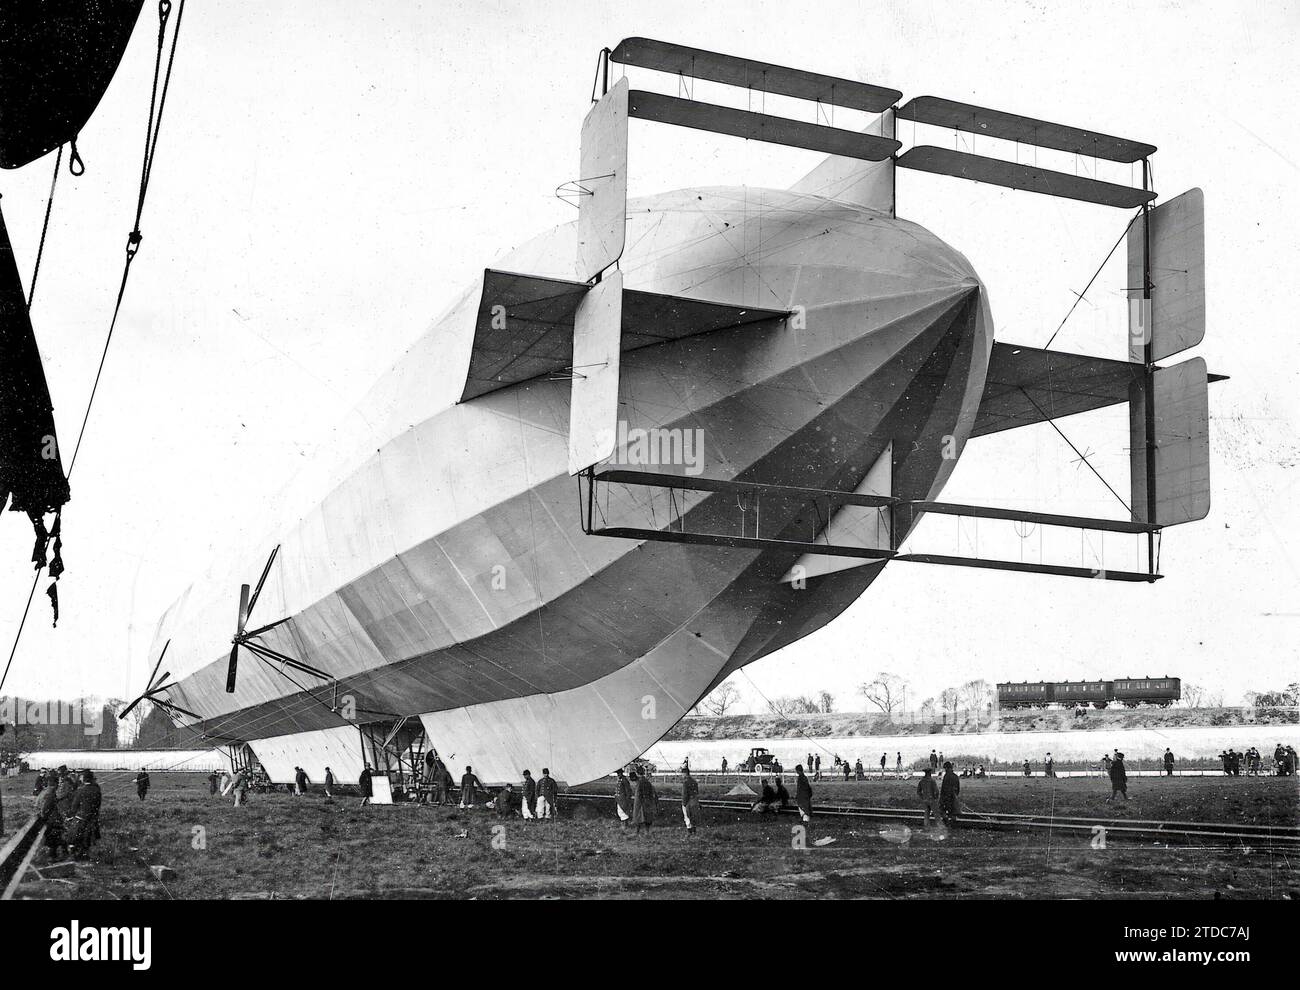 Saint Cyr (France). April 1913. The rigid airship 'Spiess', the first of its kind, in the Aerostatic Park. Credit: Album / Archivo ABC / M. Rol Stock Photo